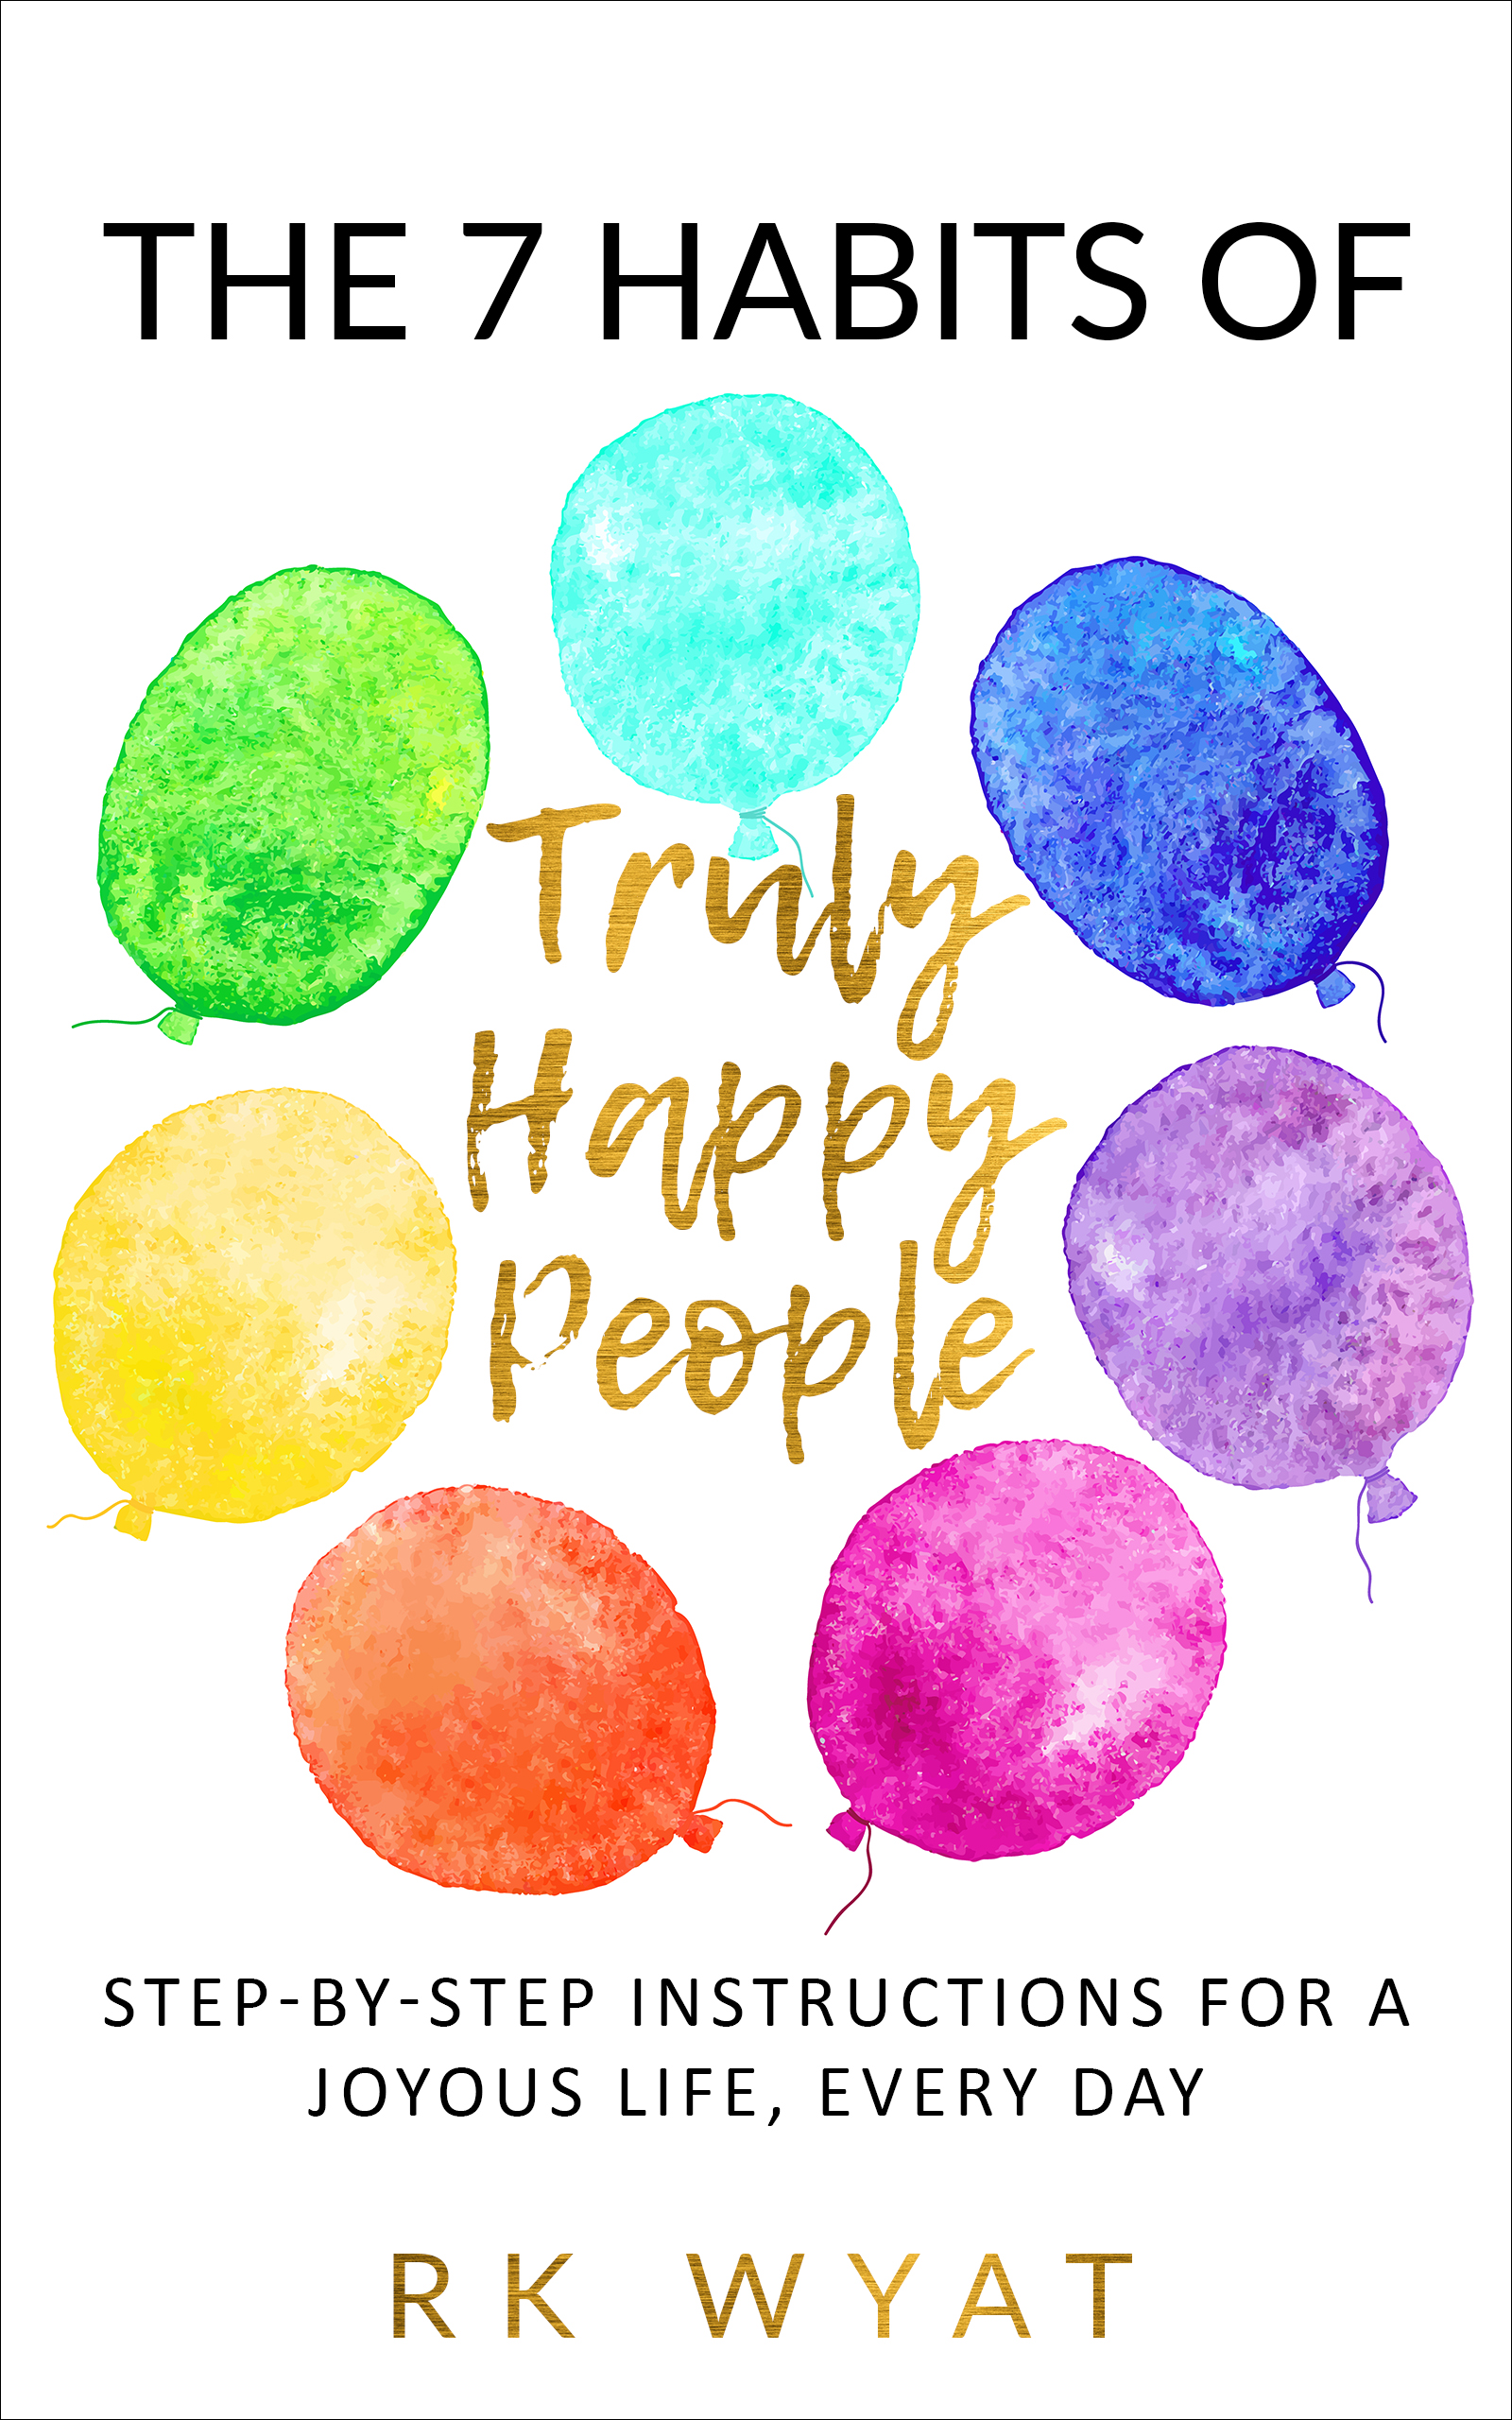 RK Wyat: The 7 Habits of Truly Happy People